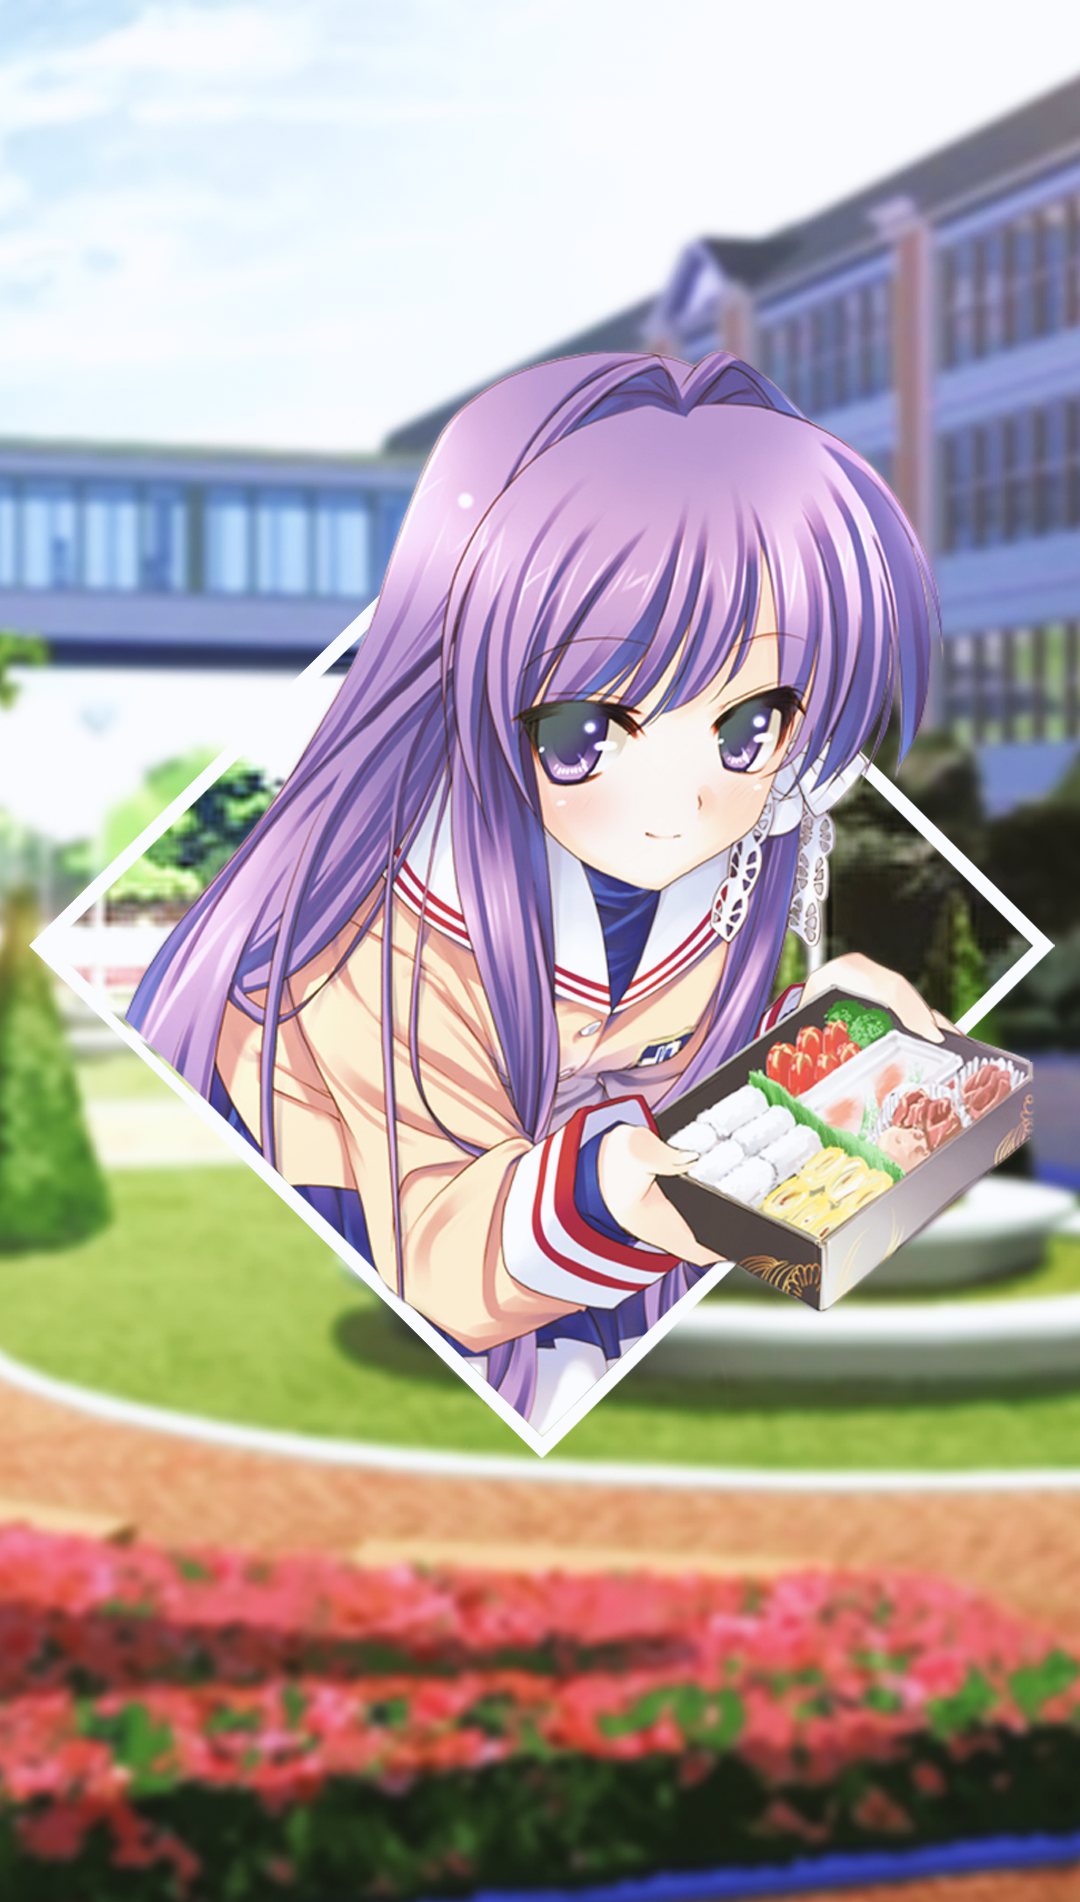 Anime 1080x1902 anime anime girls picture-in-picture Clannad Fujibayashi Kyou purple hair long hair food purple eyes